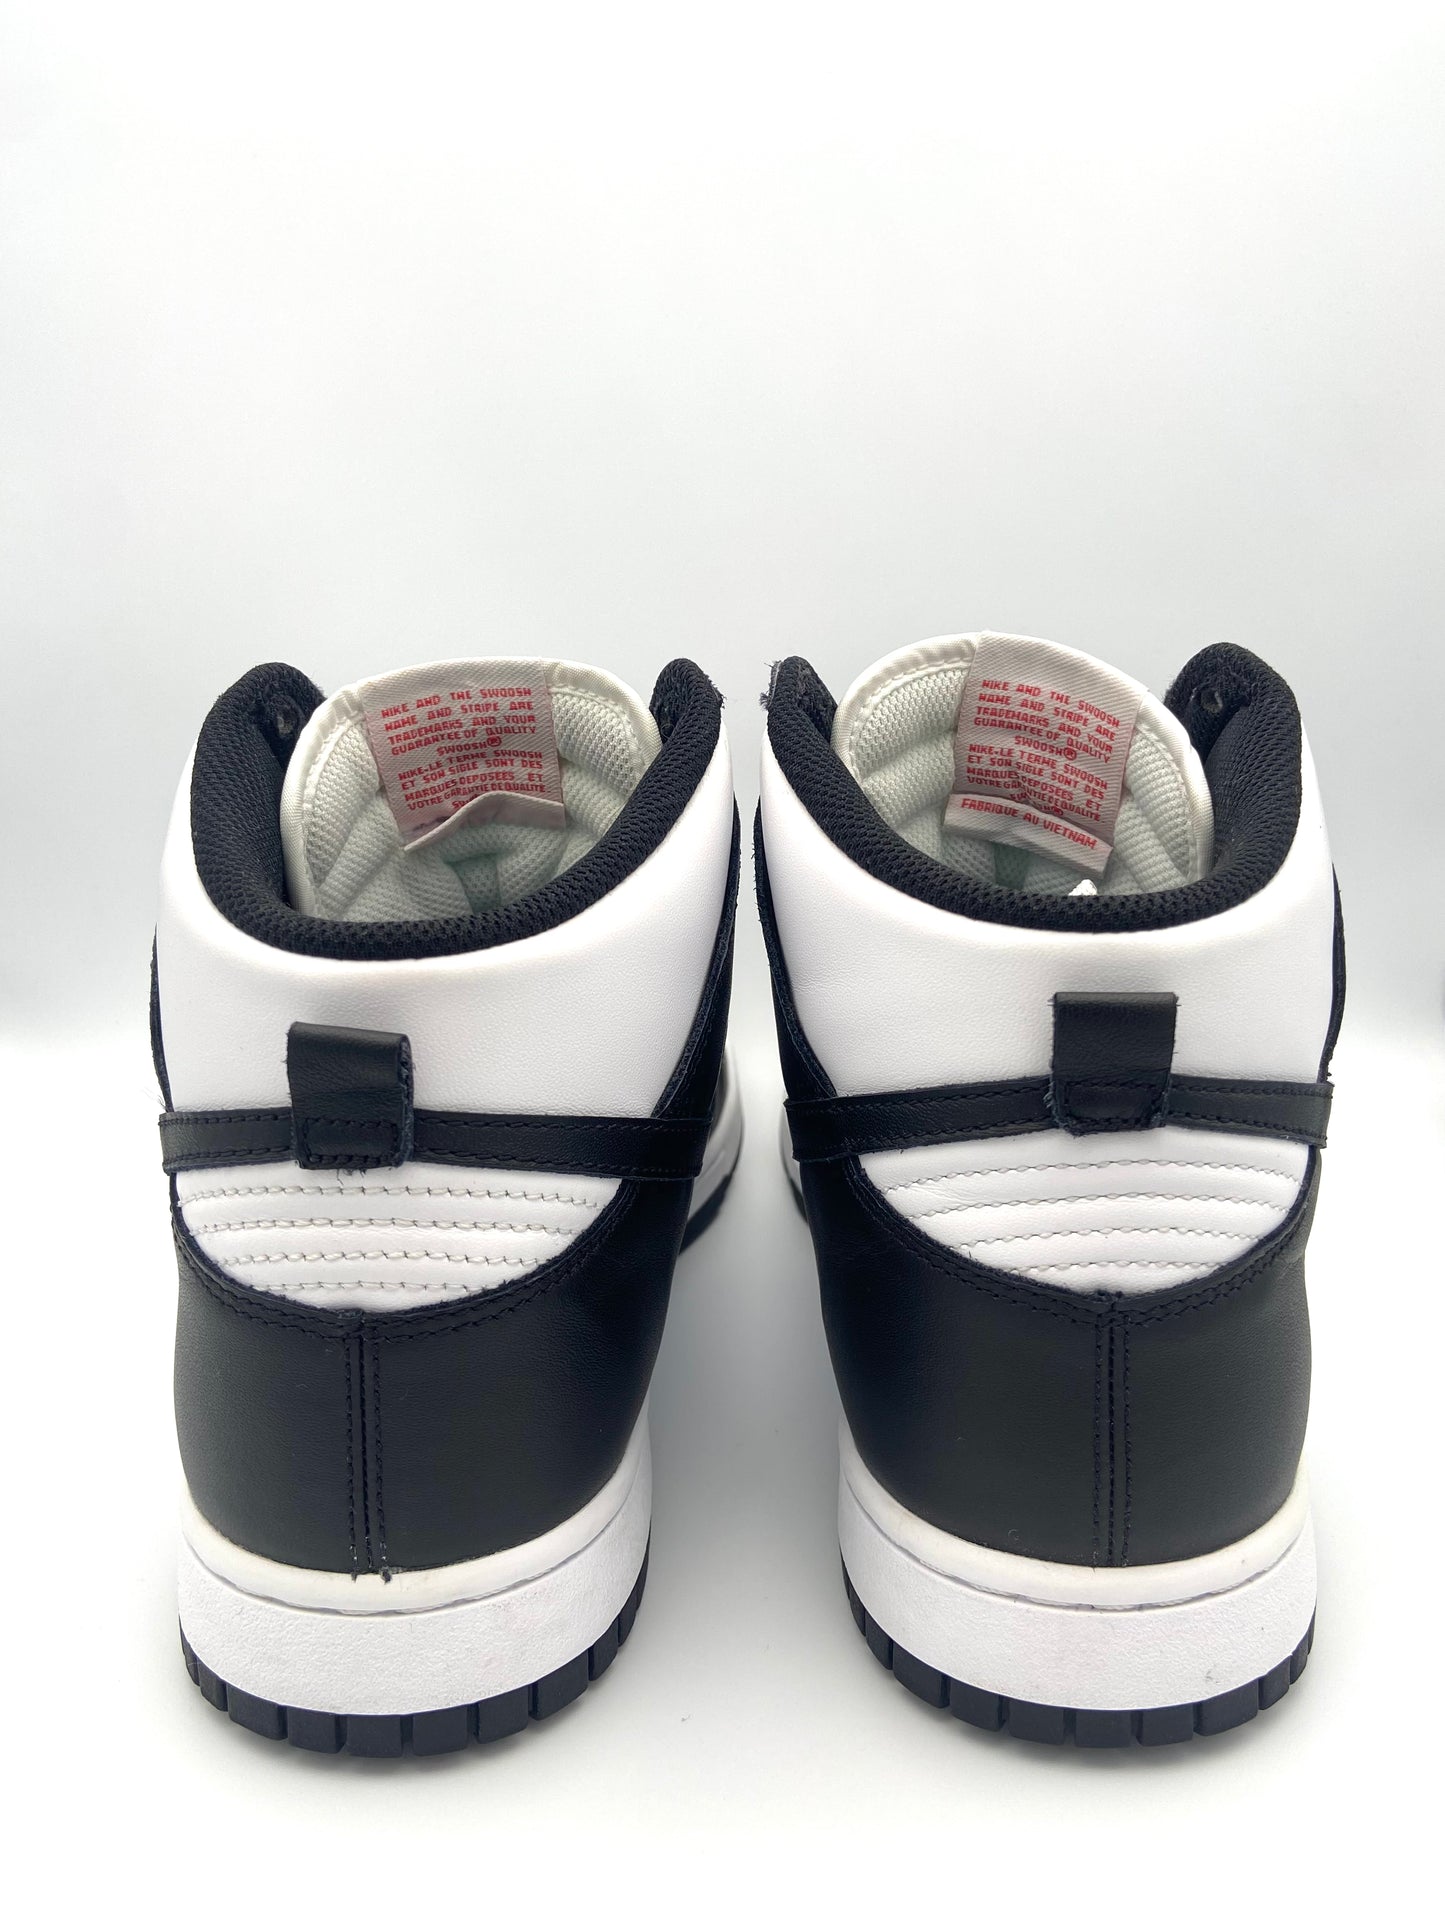 Nike Dunk High Black White - Red Label (used)